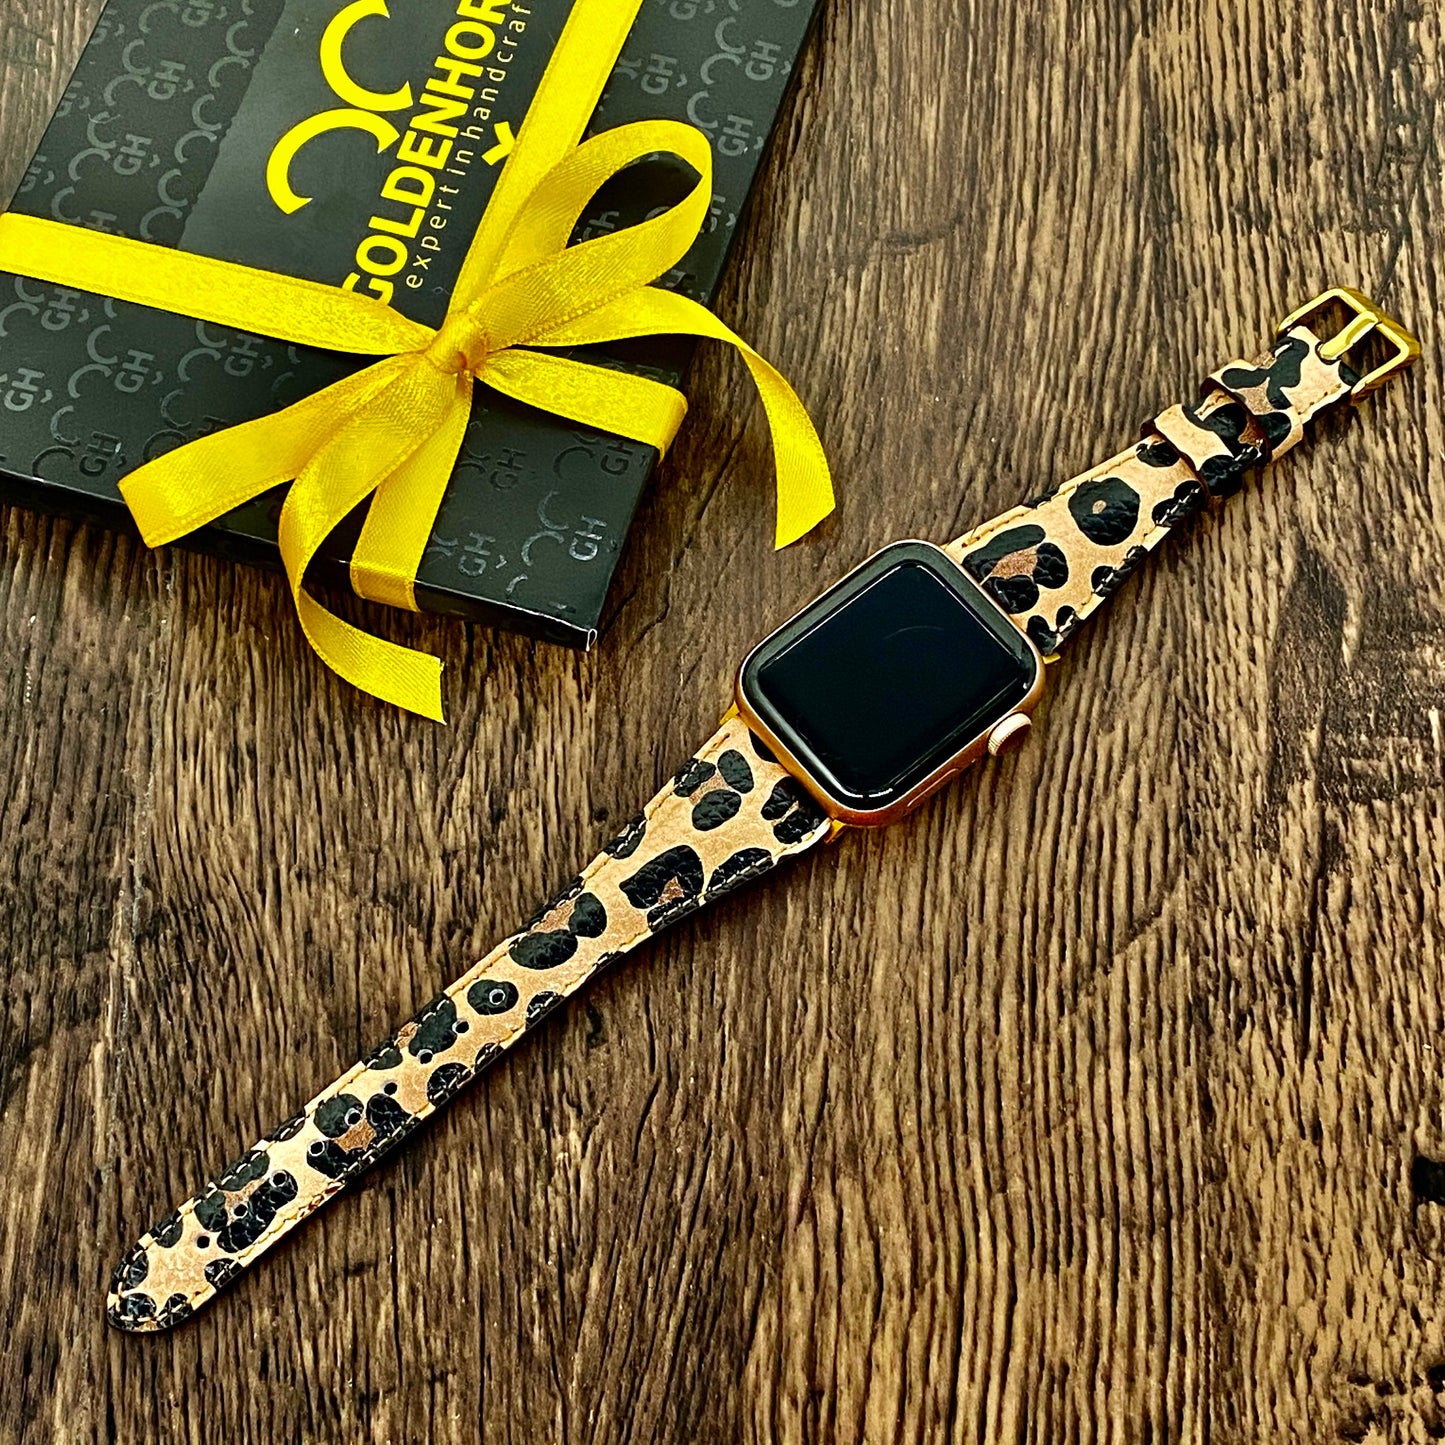 Leopard Pattern Slim Premium Leather Apple Watch Band 38mm, 42mm, 44mm, 40mm for 6-5-4-3-2 Gift for Him, Gift for Husband, Gift for Friend